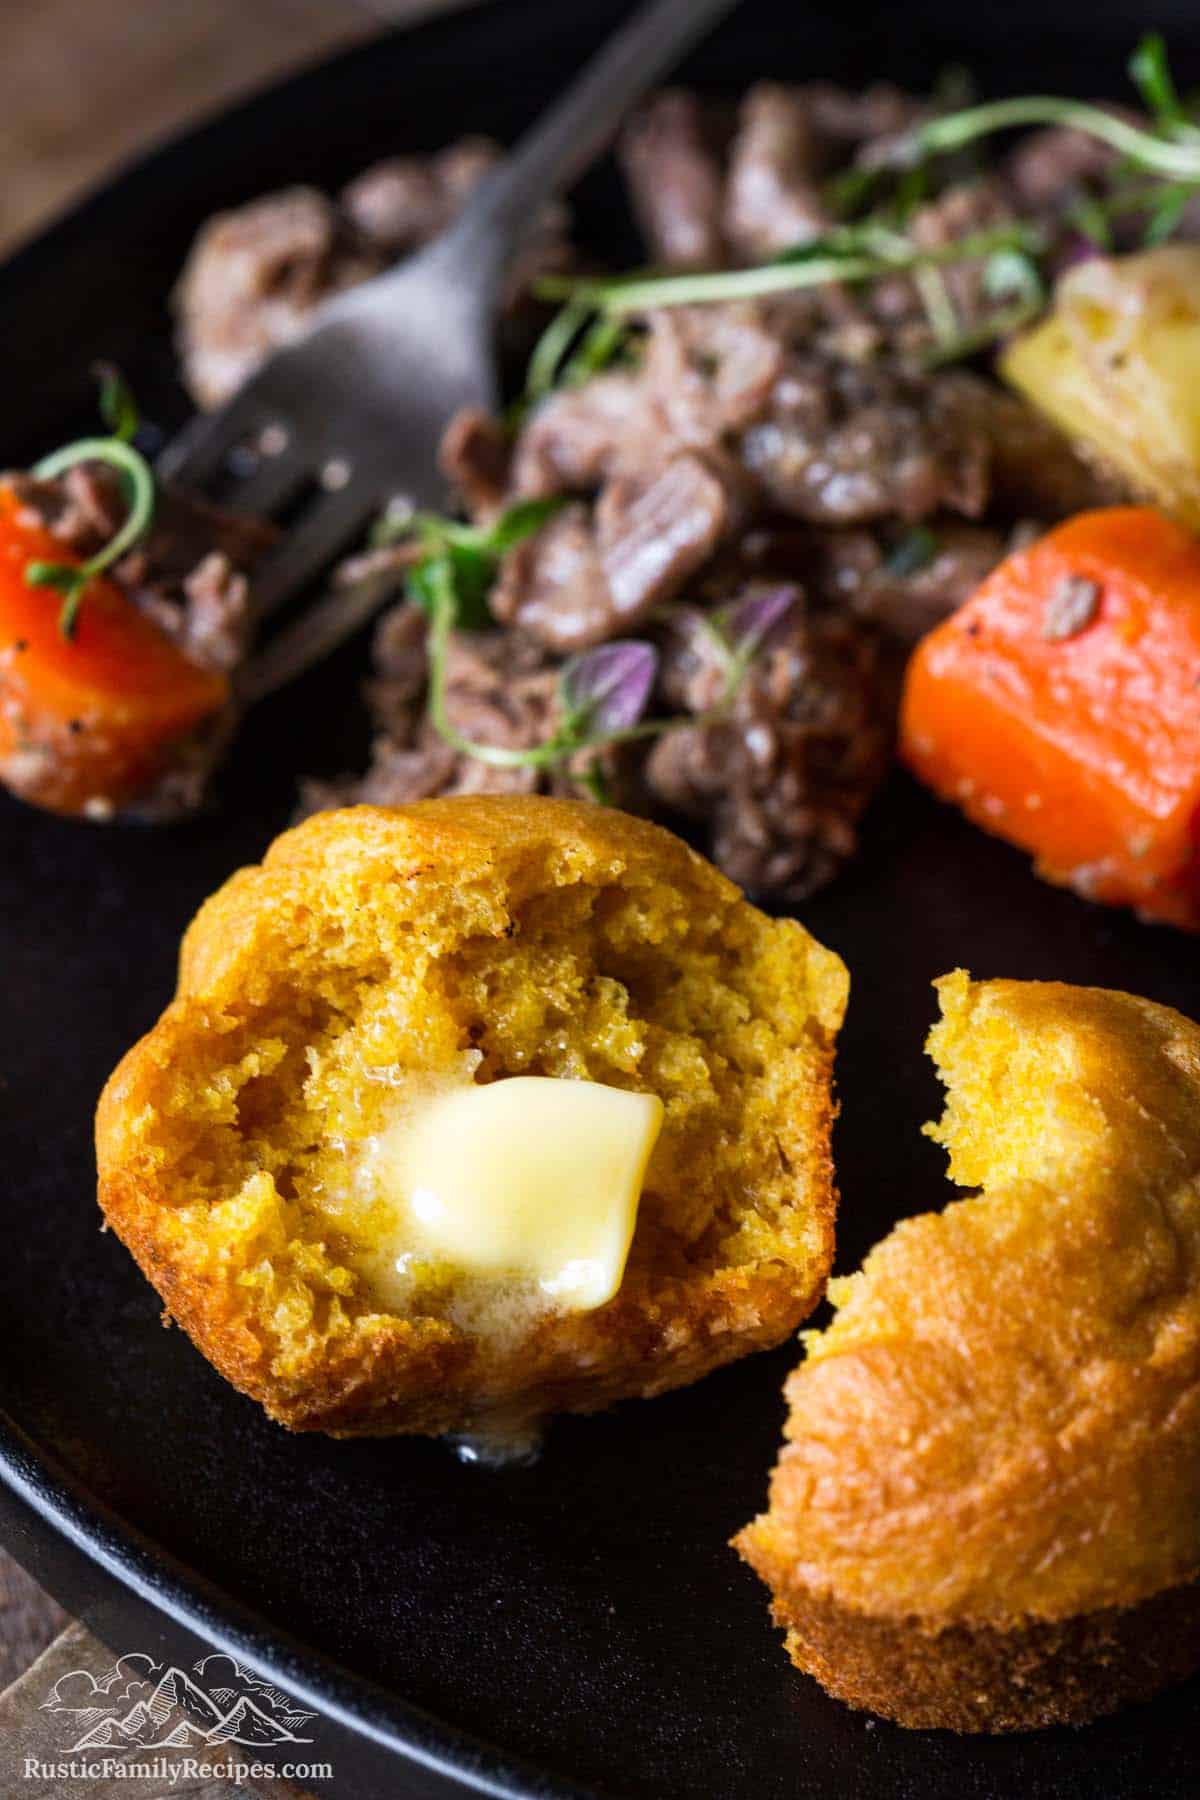 Cornbread muffins on a plate with pot roast, carrots and potatoes